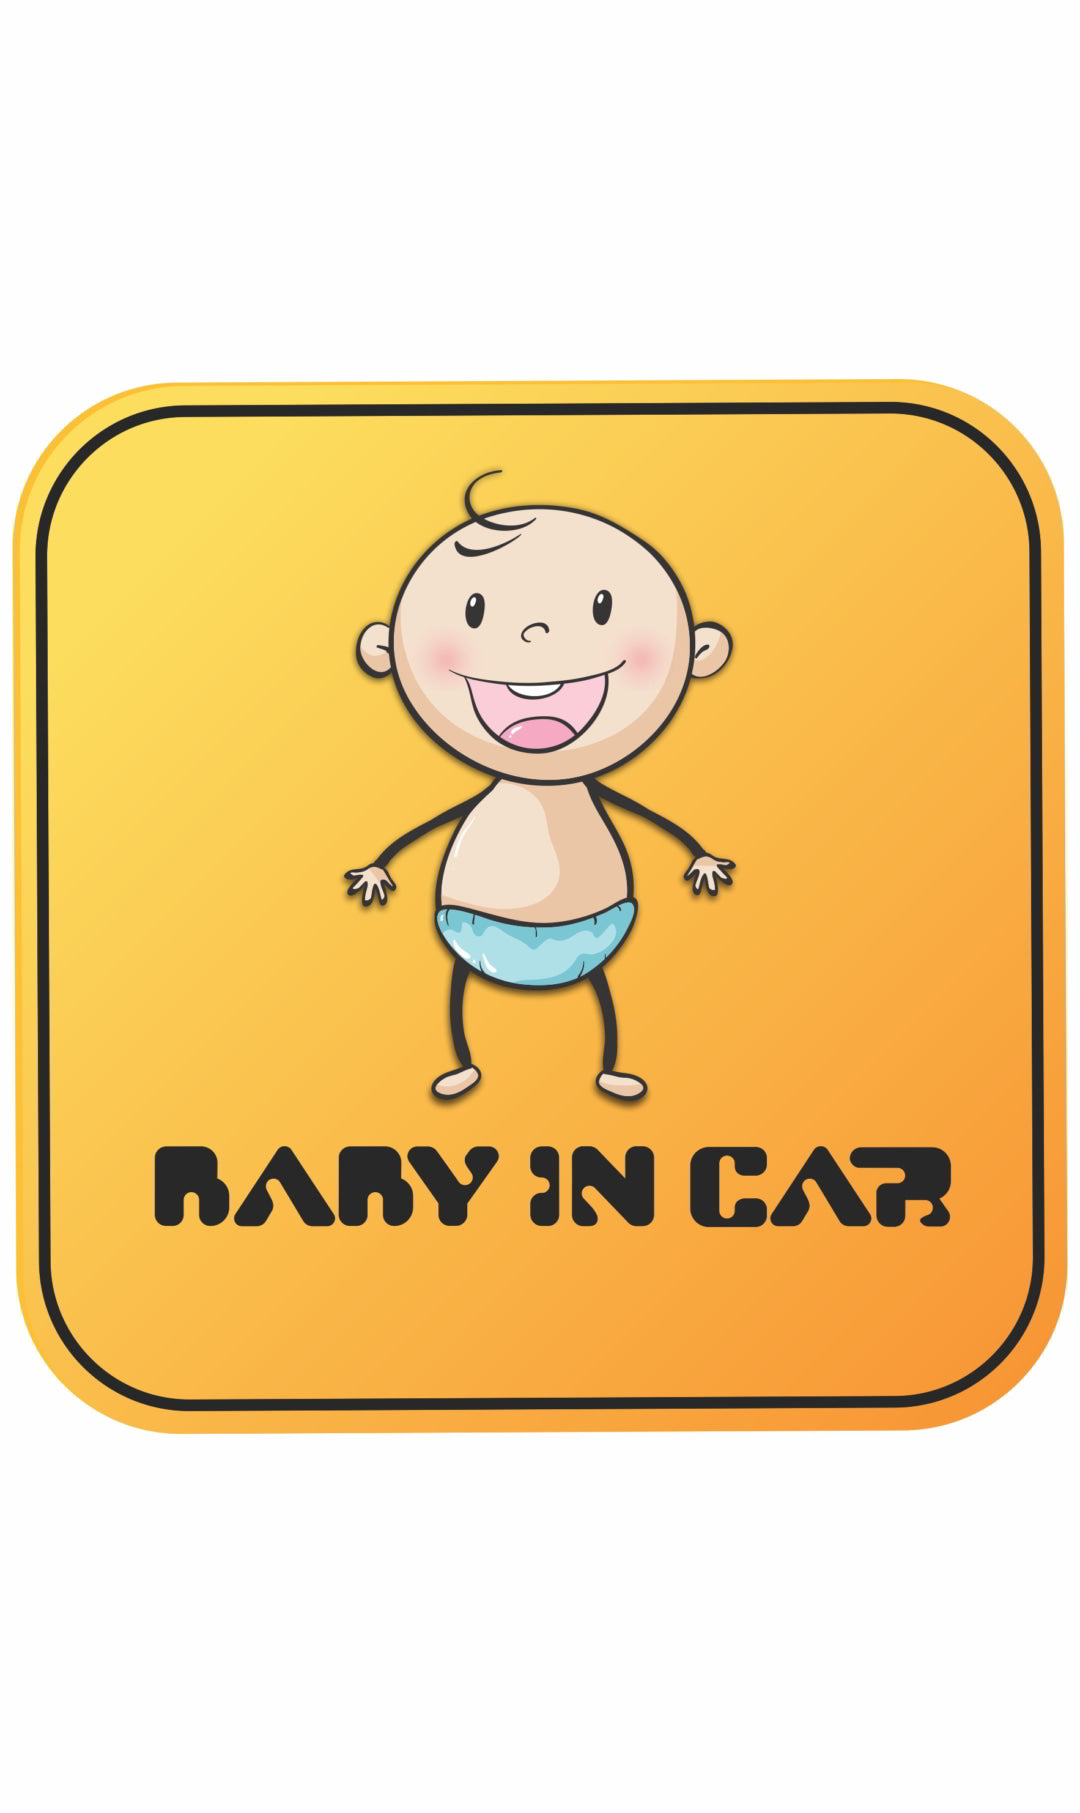 BABY IN CAR Decal Sticker(2pc)_c10